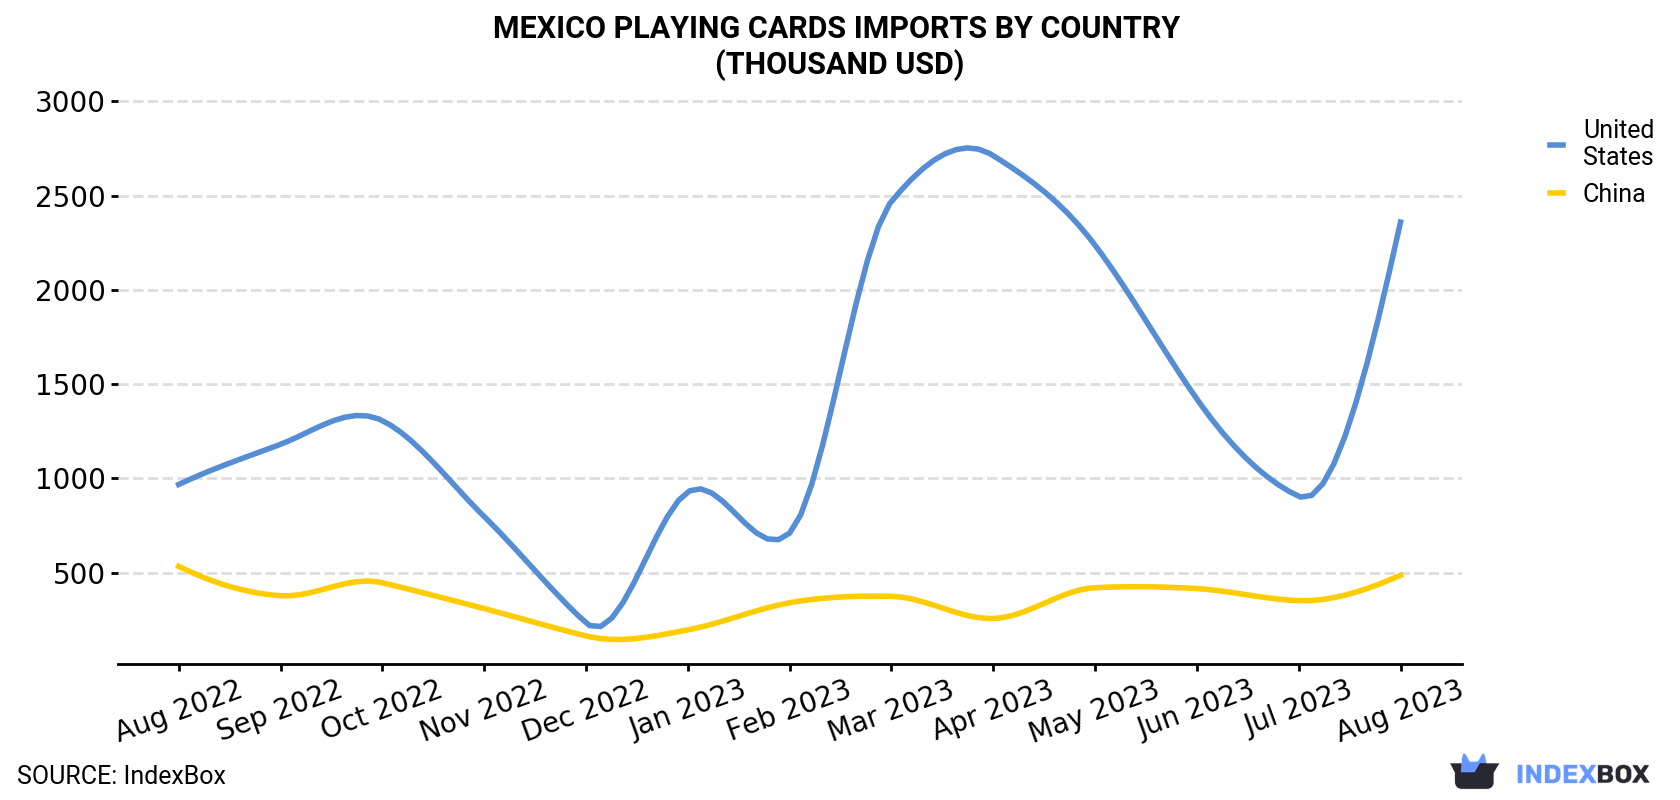 Mexico Playing Cards Imports By Country (Thousand USD)